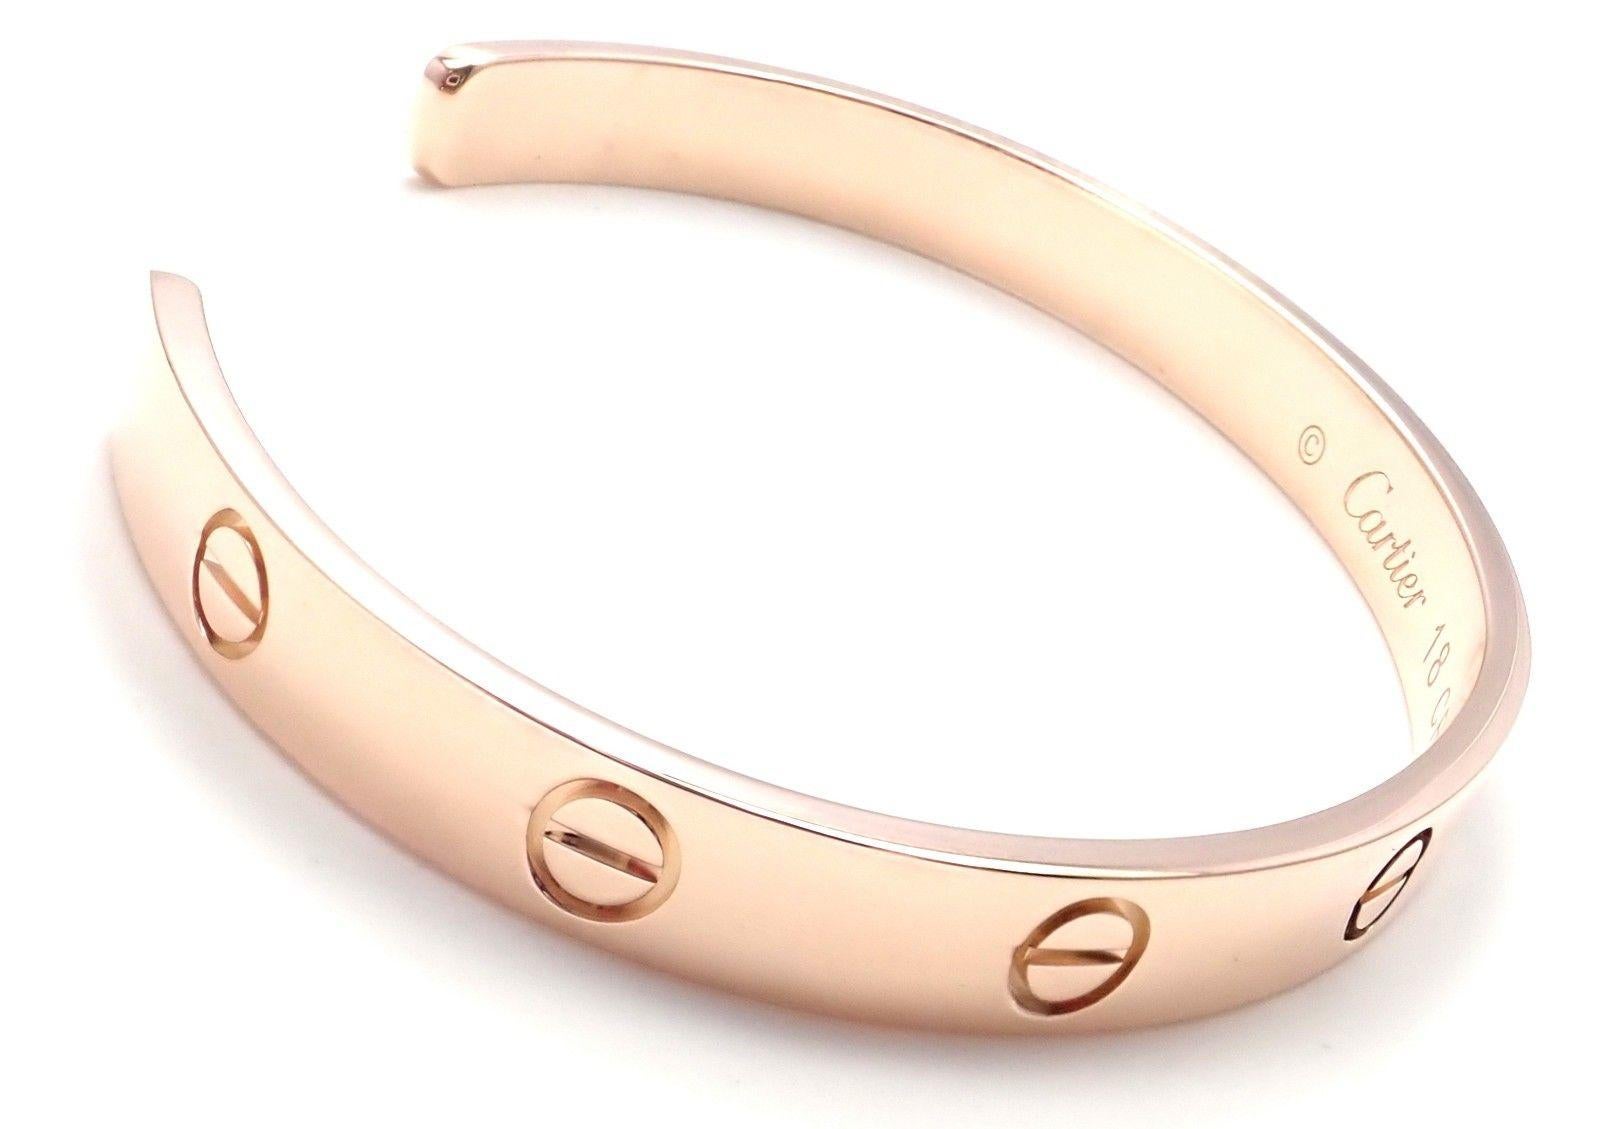 18k Rose Gold Cartier Love Open Cuff Bangle Bracelet. Size 18.
This bracelet comes with Cartier certificate, box and a receipt from 2017.
Details:
Length: 18cm
Weight: 24.1 grams
Width: 6.5mm
Hallmarks: Cartier 750 18 CRA897
*Free Shipping within